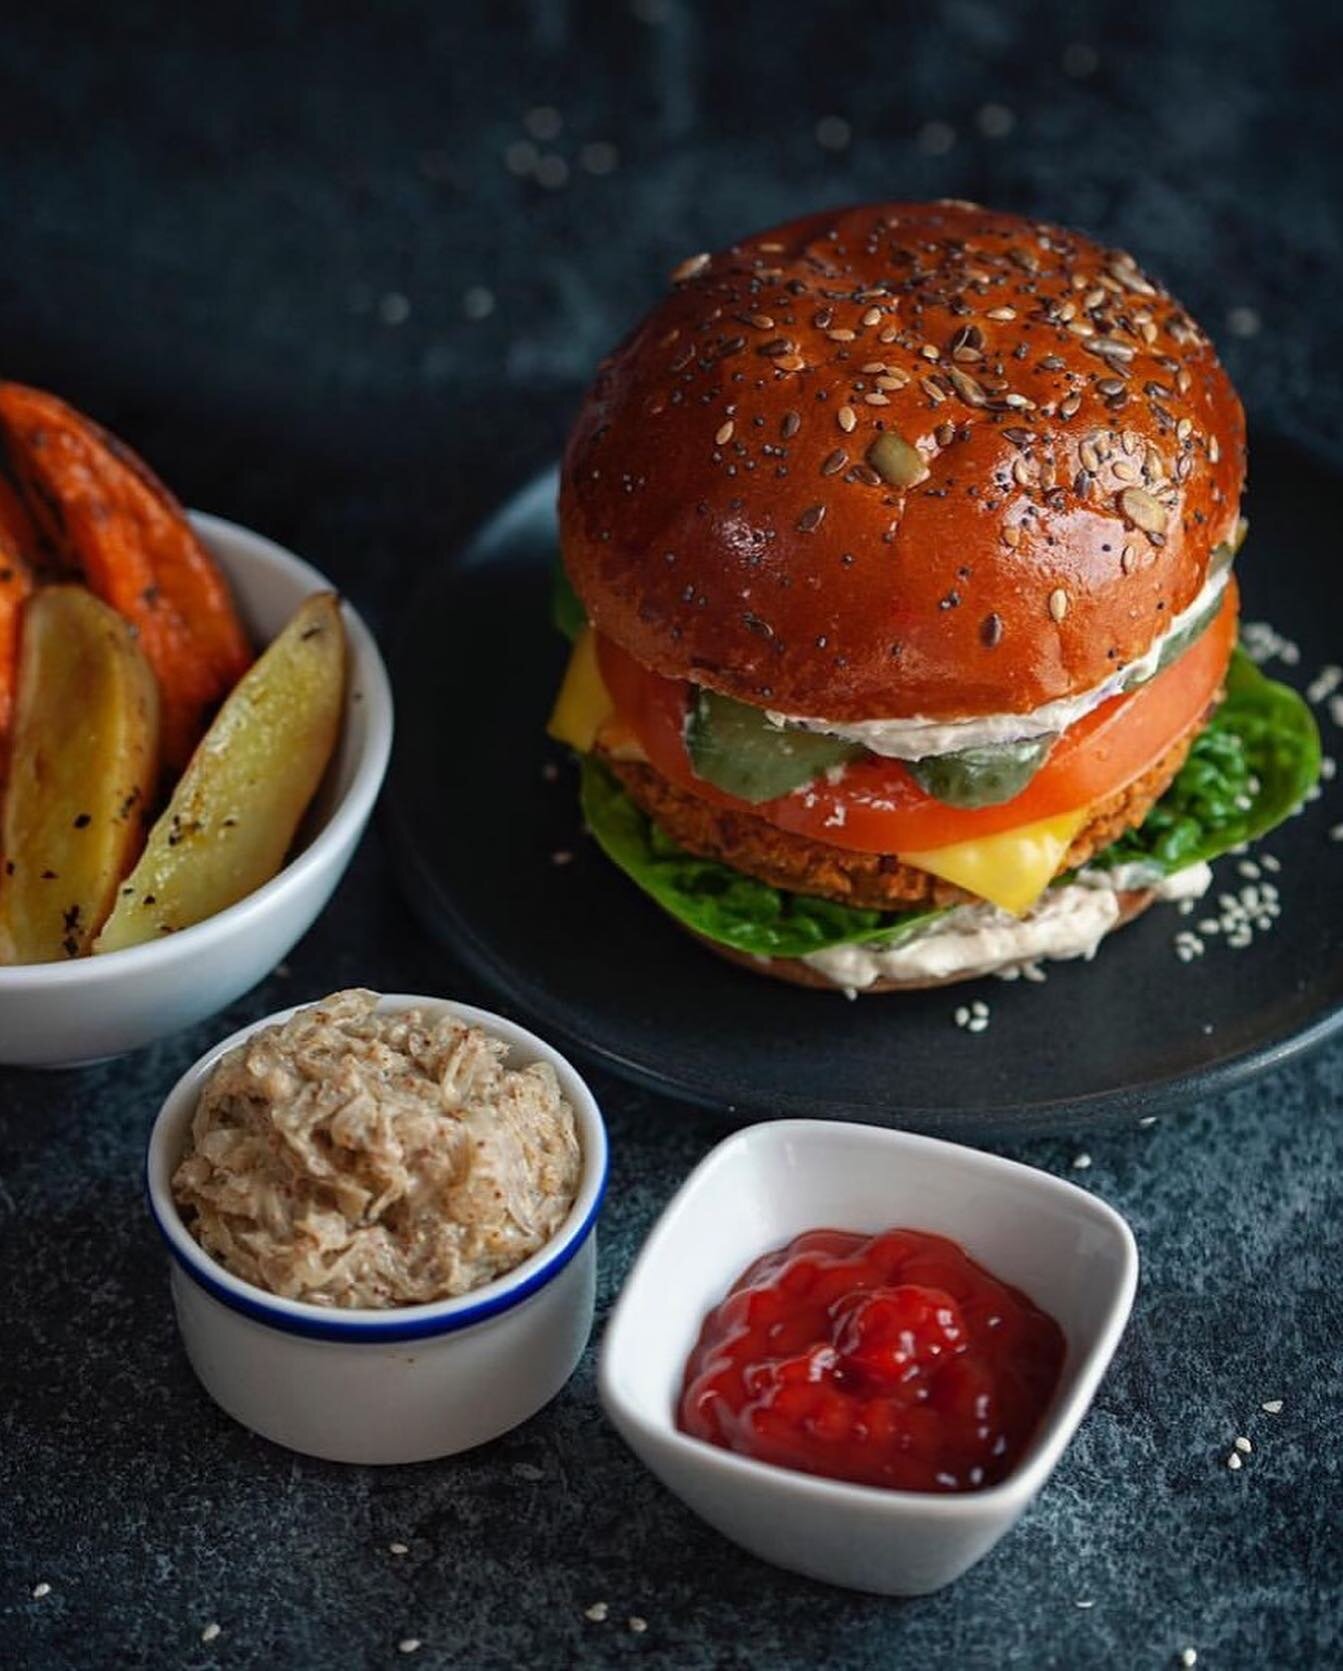 London is a city that truly has something for everyone, including those who follow a vegan diet. 

With a plethora of vegan restaurants to choose from, visitors and locals alike can enjoy delicious and healthy plant-based meals that cater to all tast